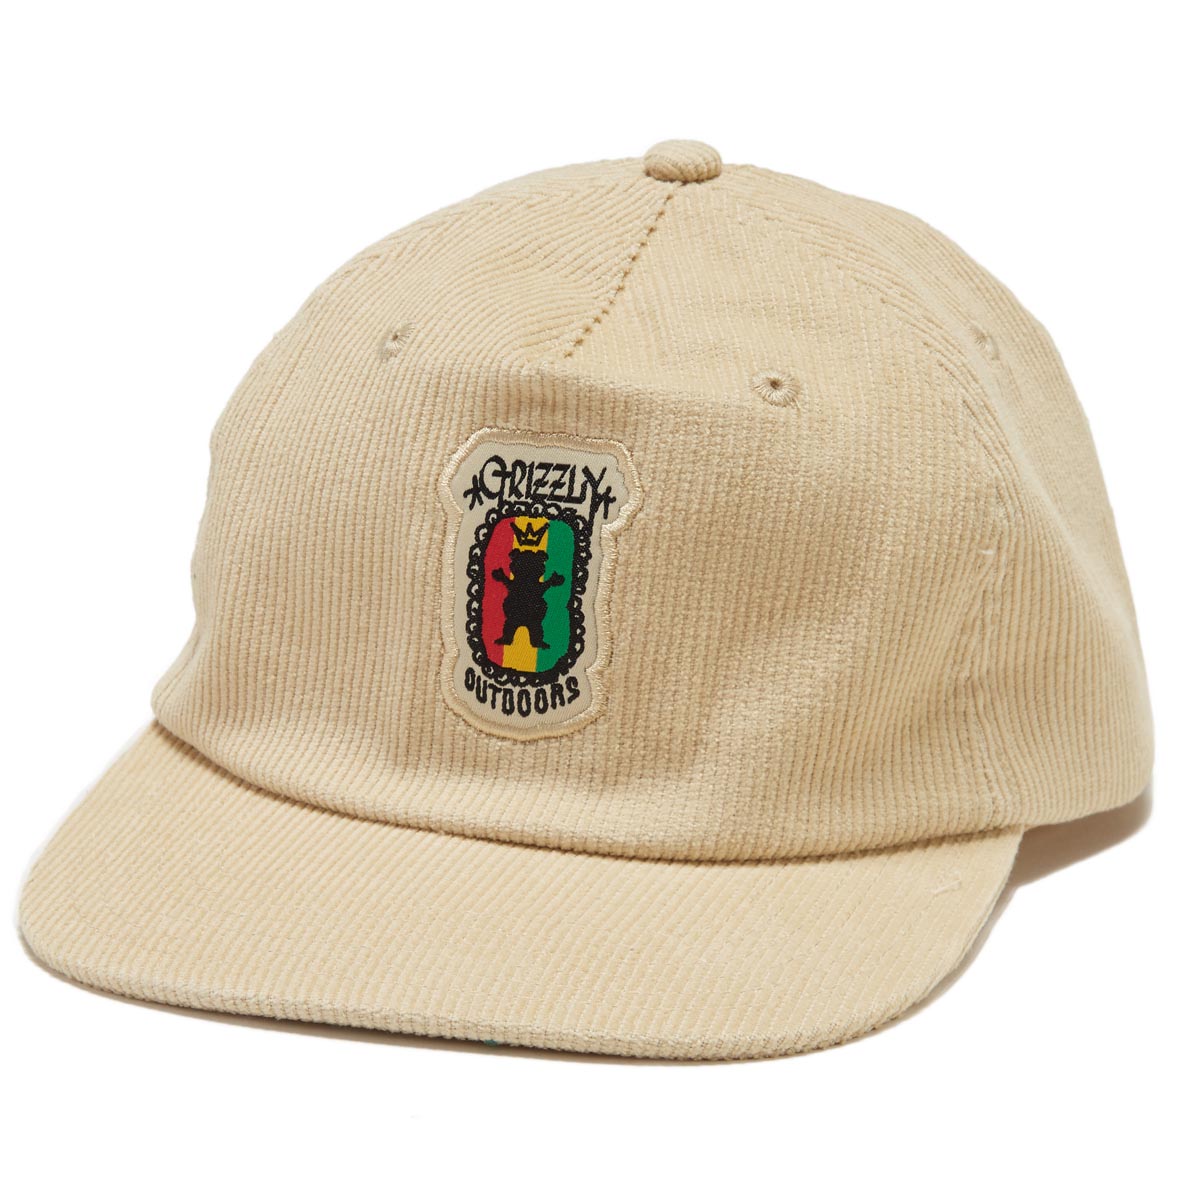 Grizzly Most High Unstructured Snapback Hat - Khaki image 1